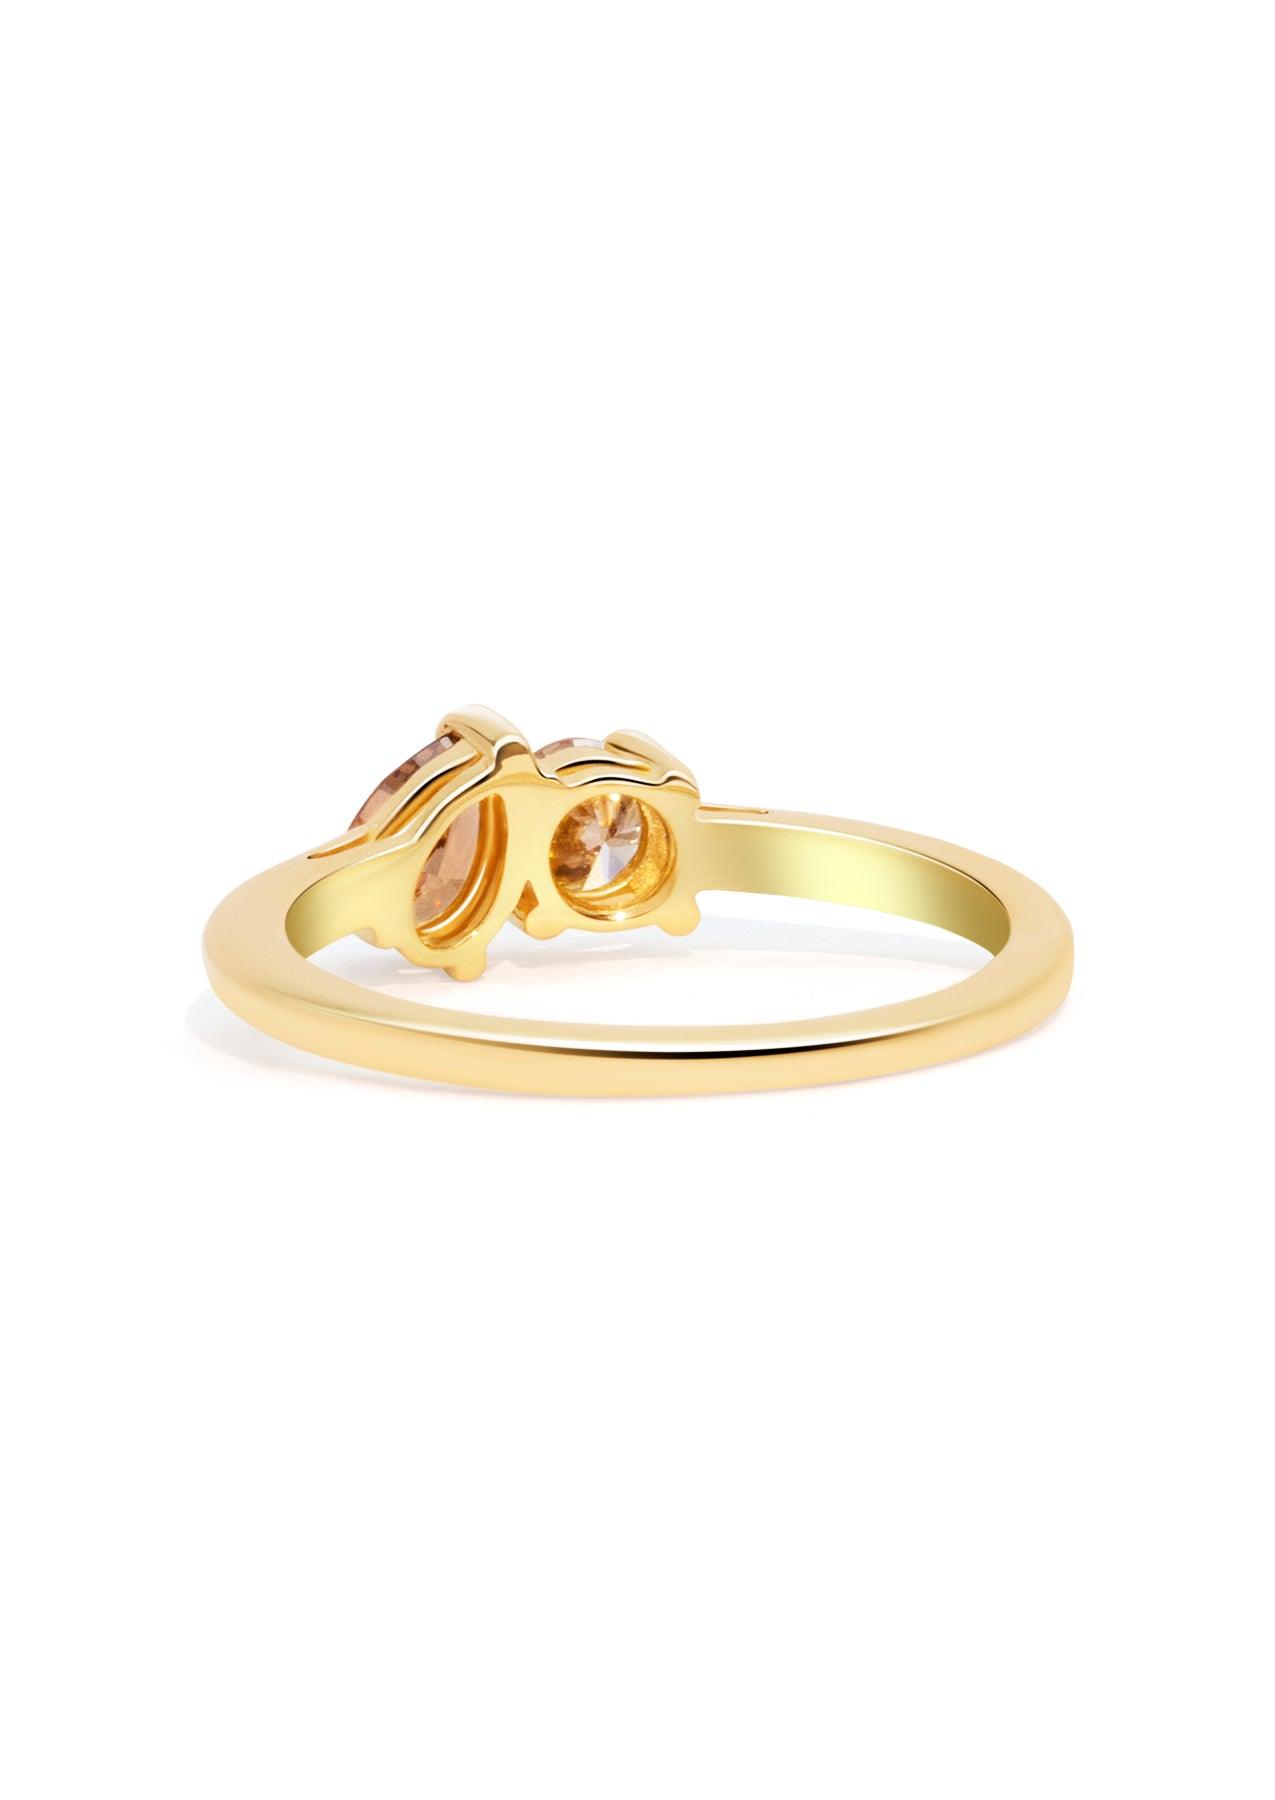 The Toi Et Moi 0.3ct Champagne and 0.37ct Cognac Diamond Ring - Molten Store